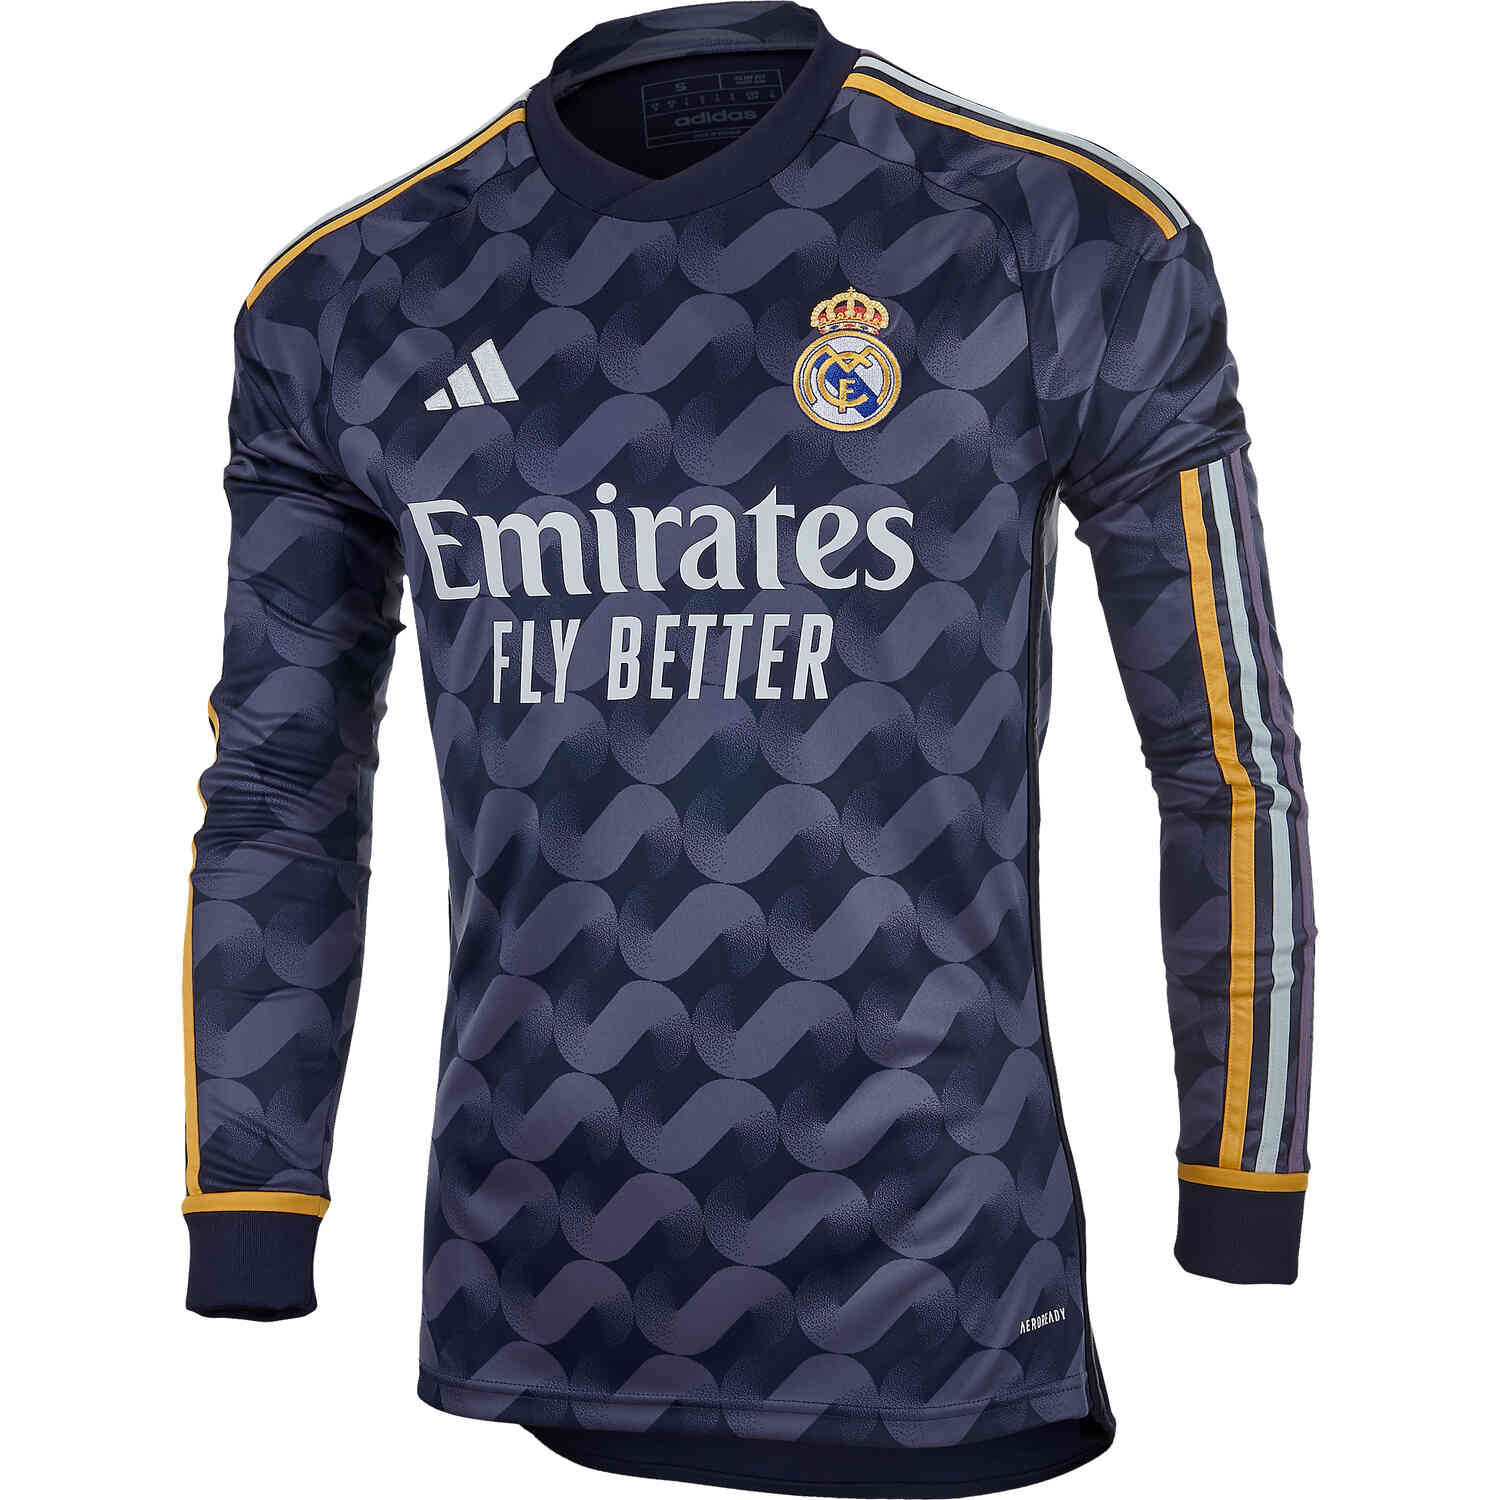 adidas, Other, Fly Emirates Jersey